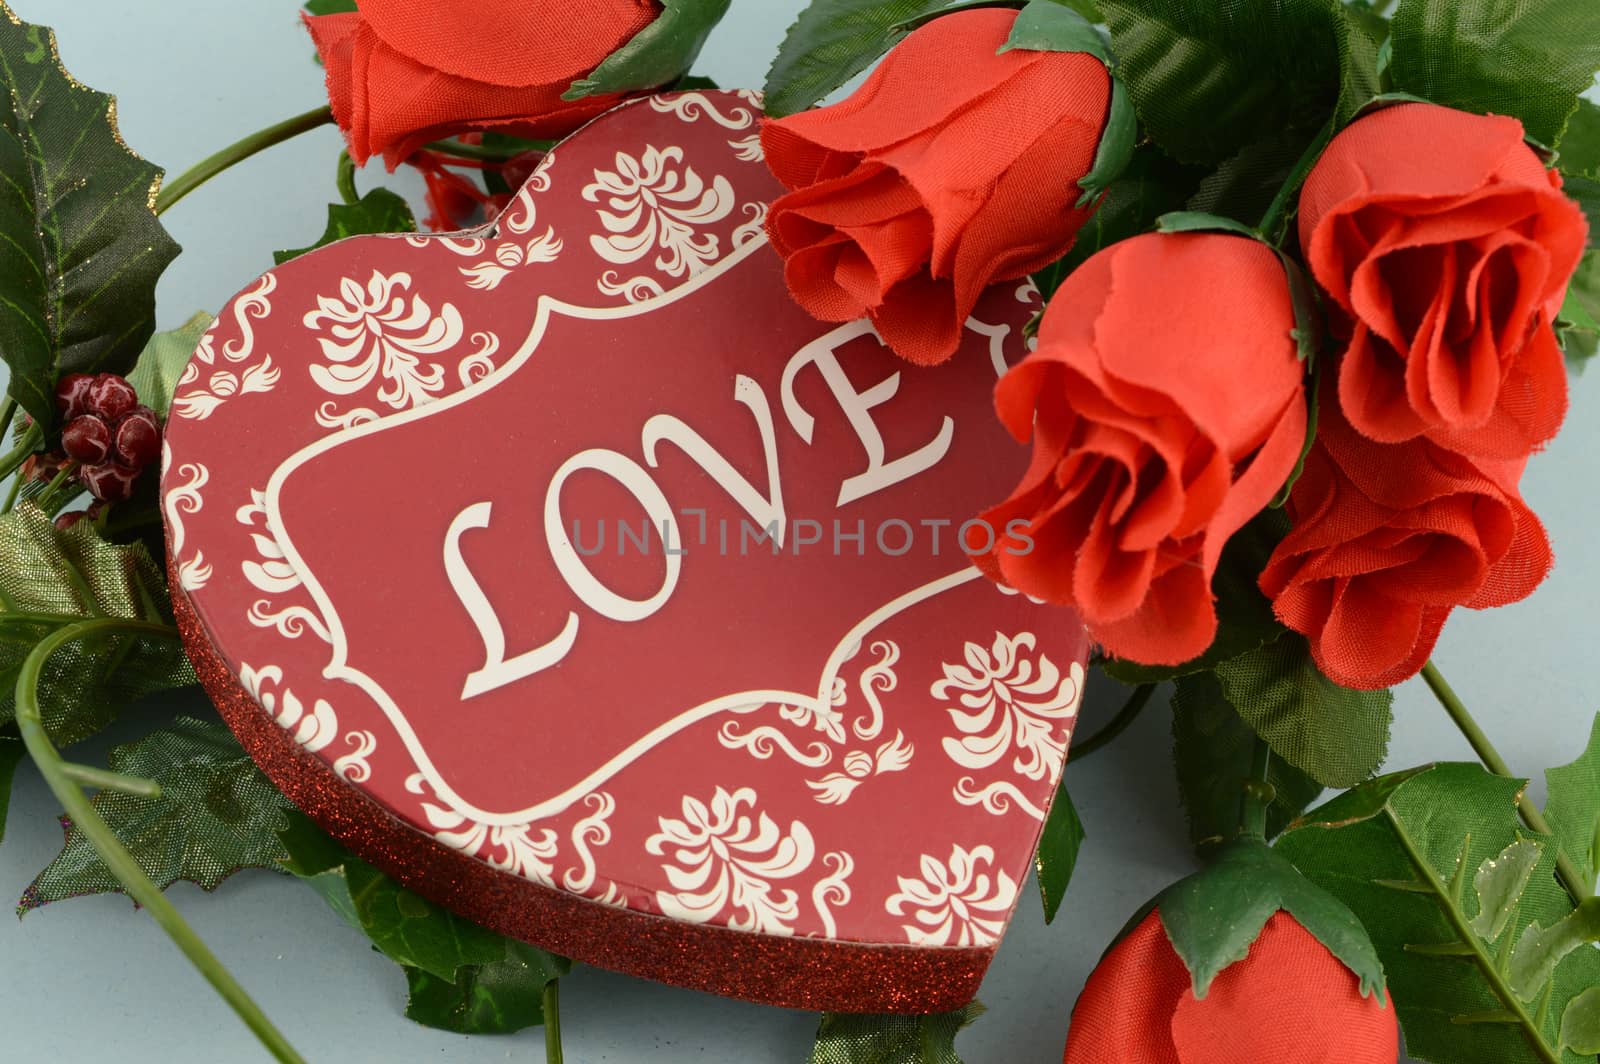 A lovely red heart shaped box for gift giving during a time of celebration and romance.